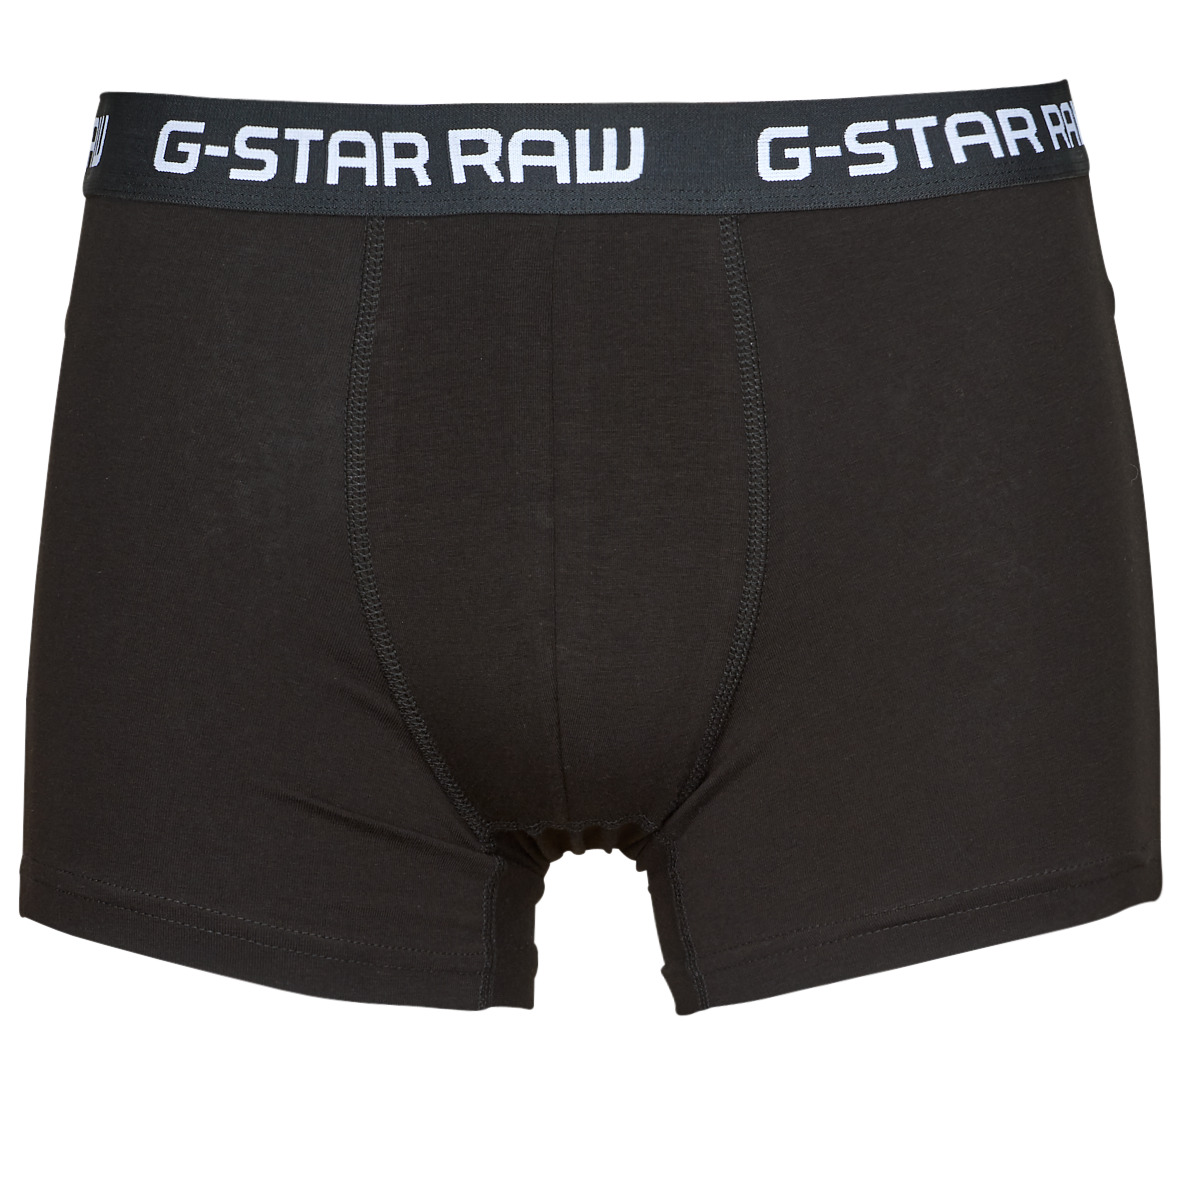 Boxer G-Star Raw classic trunk